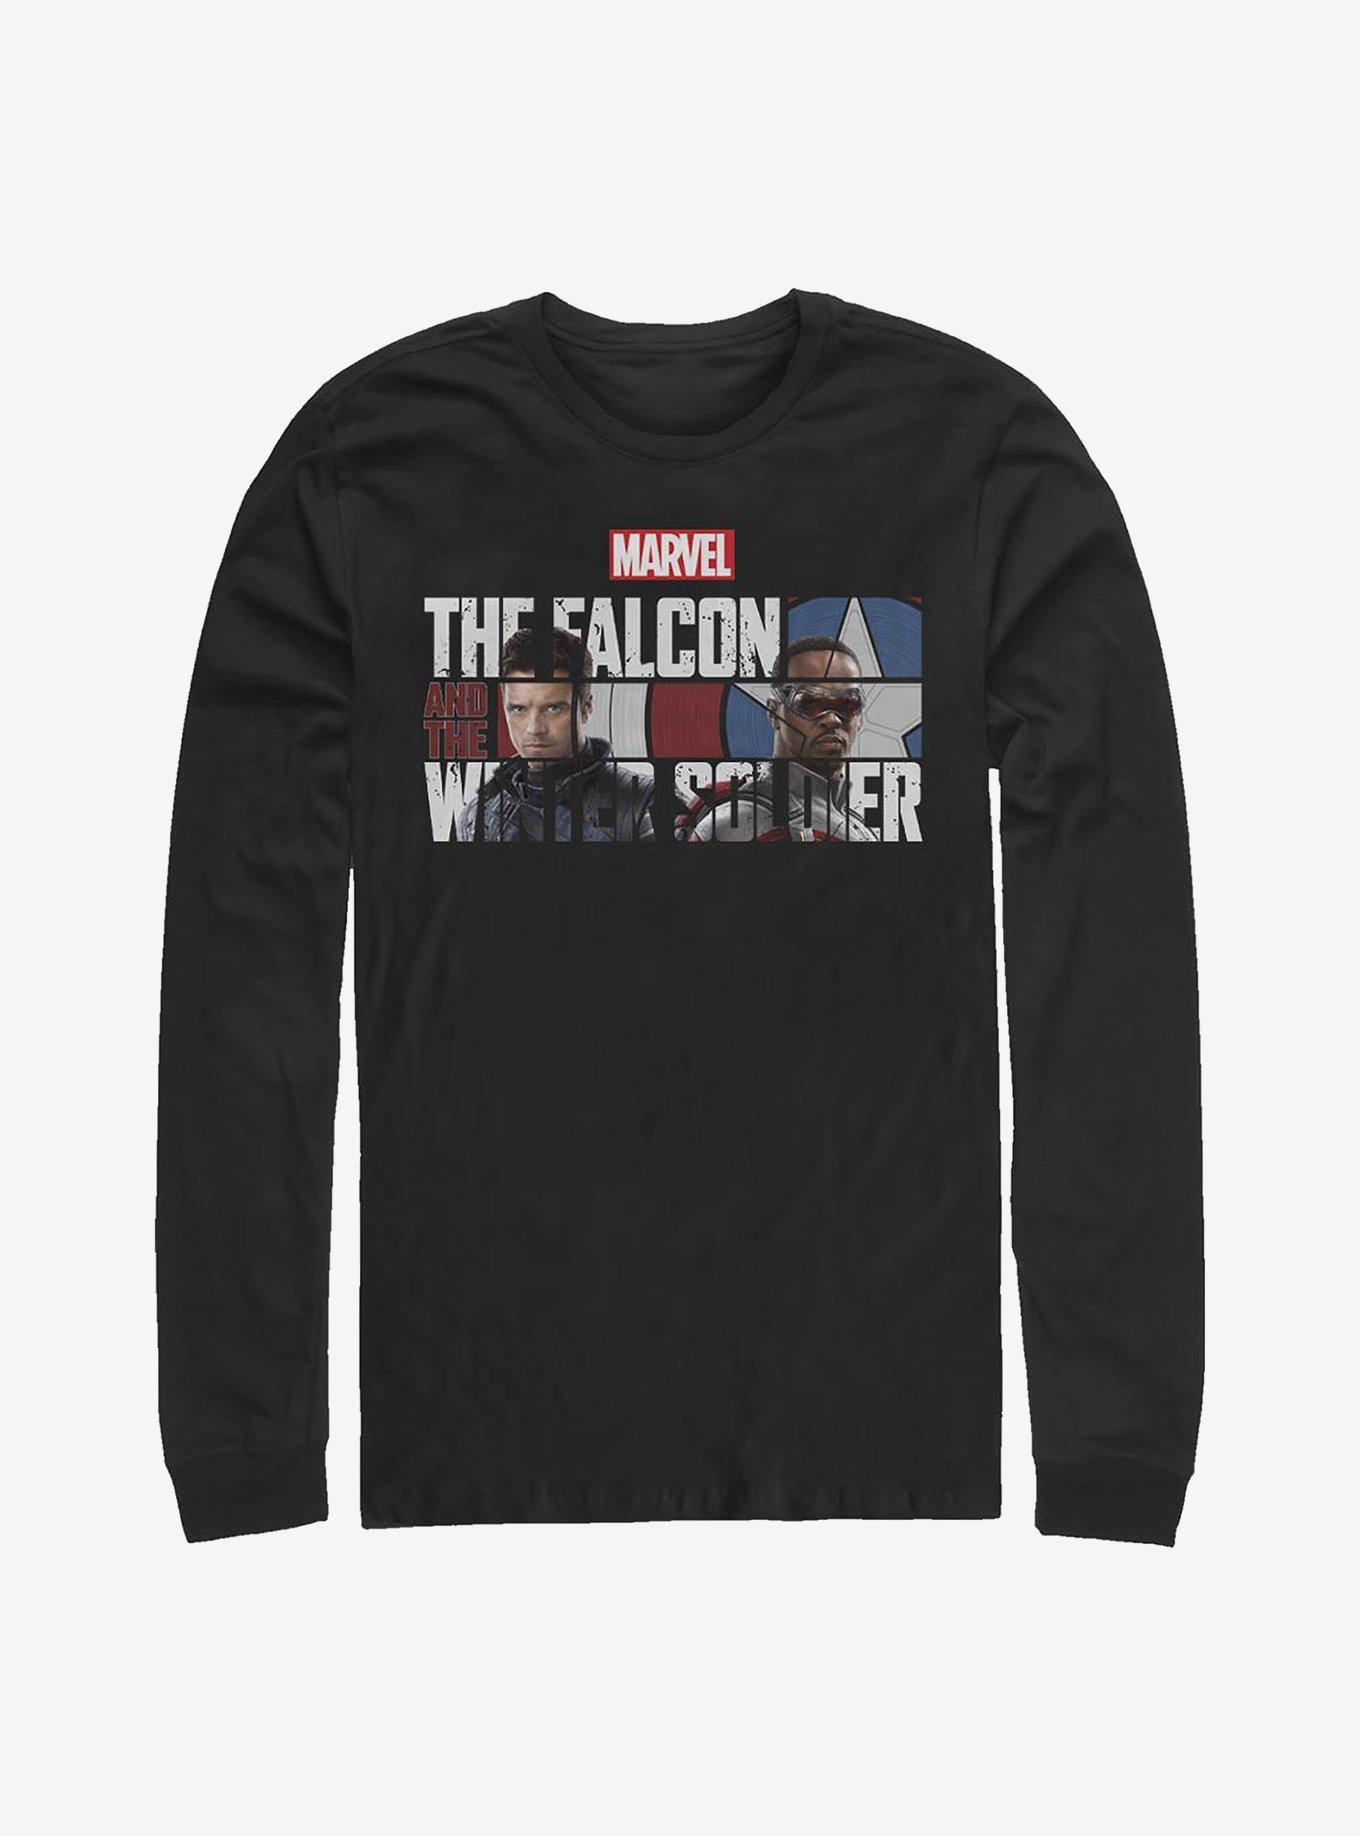 Marvel The Falcon And The Winter Soldier Logo Fill Long-Sleeve T-Shirt, BLACK, hi-res